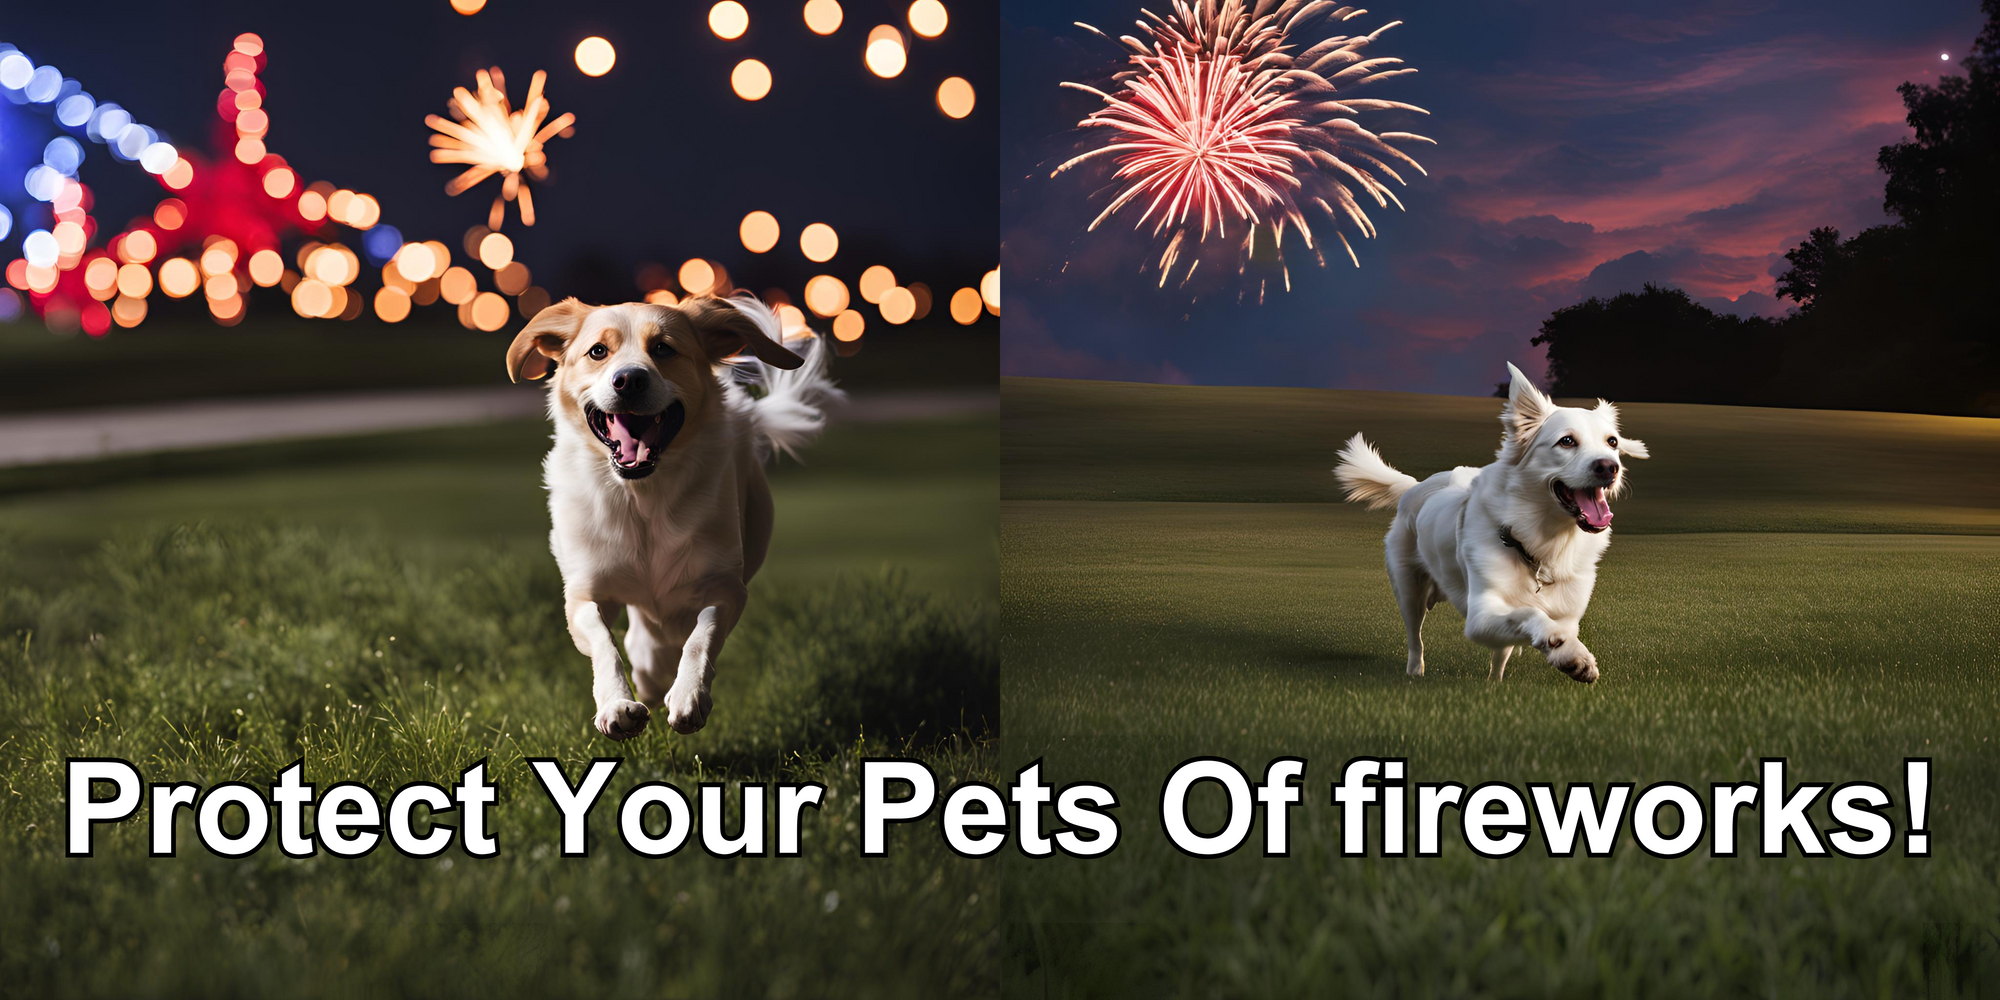 Protect Your Pets This 4th of July!